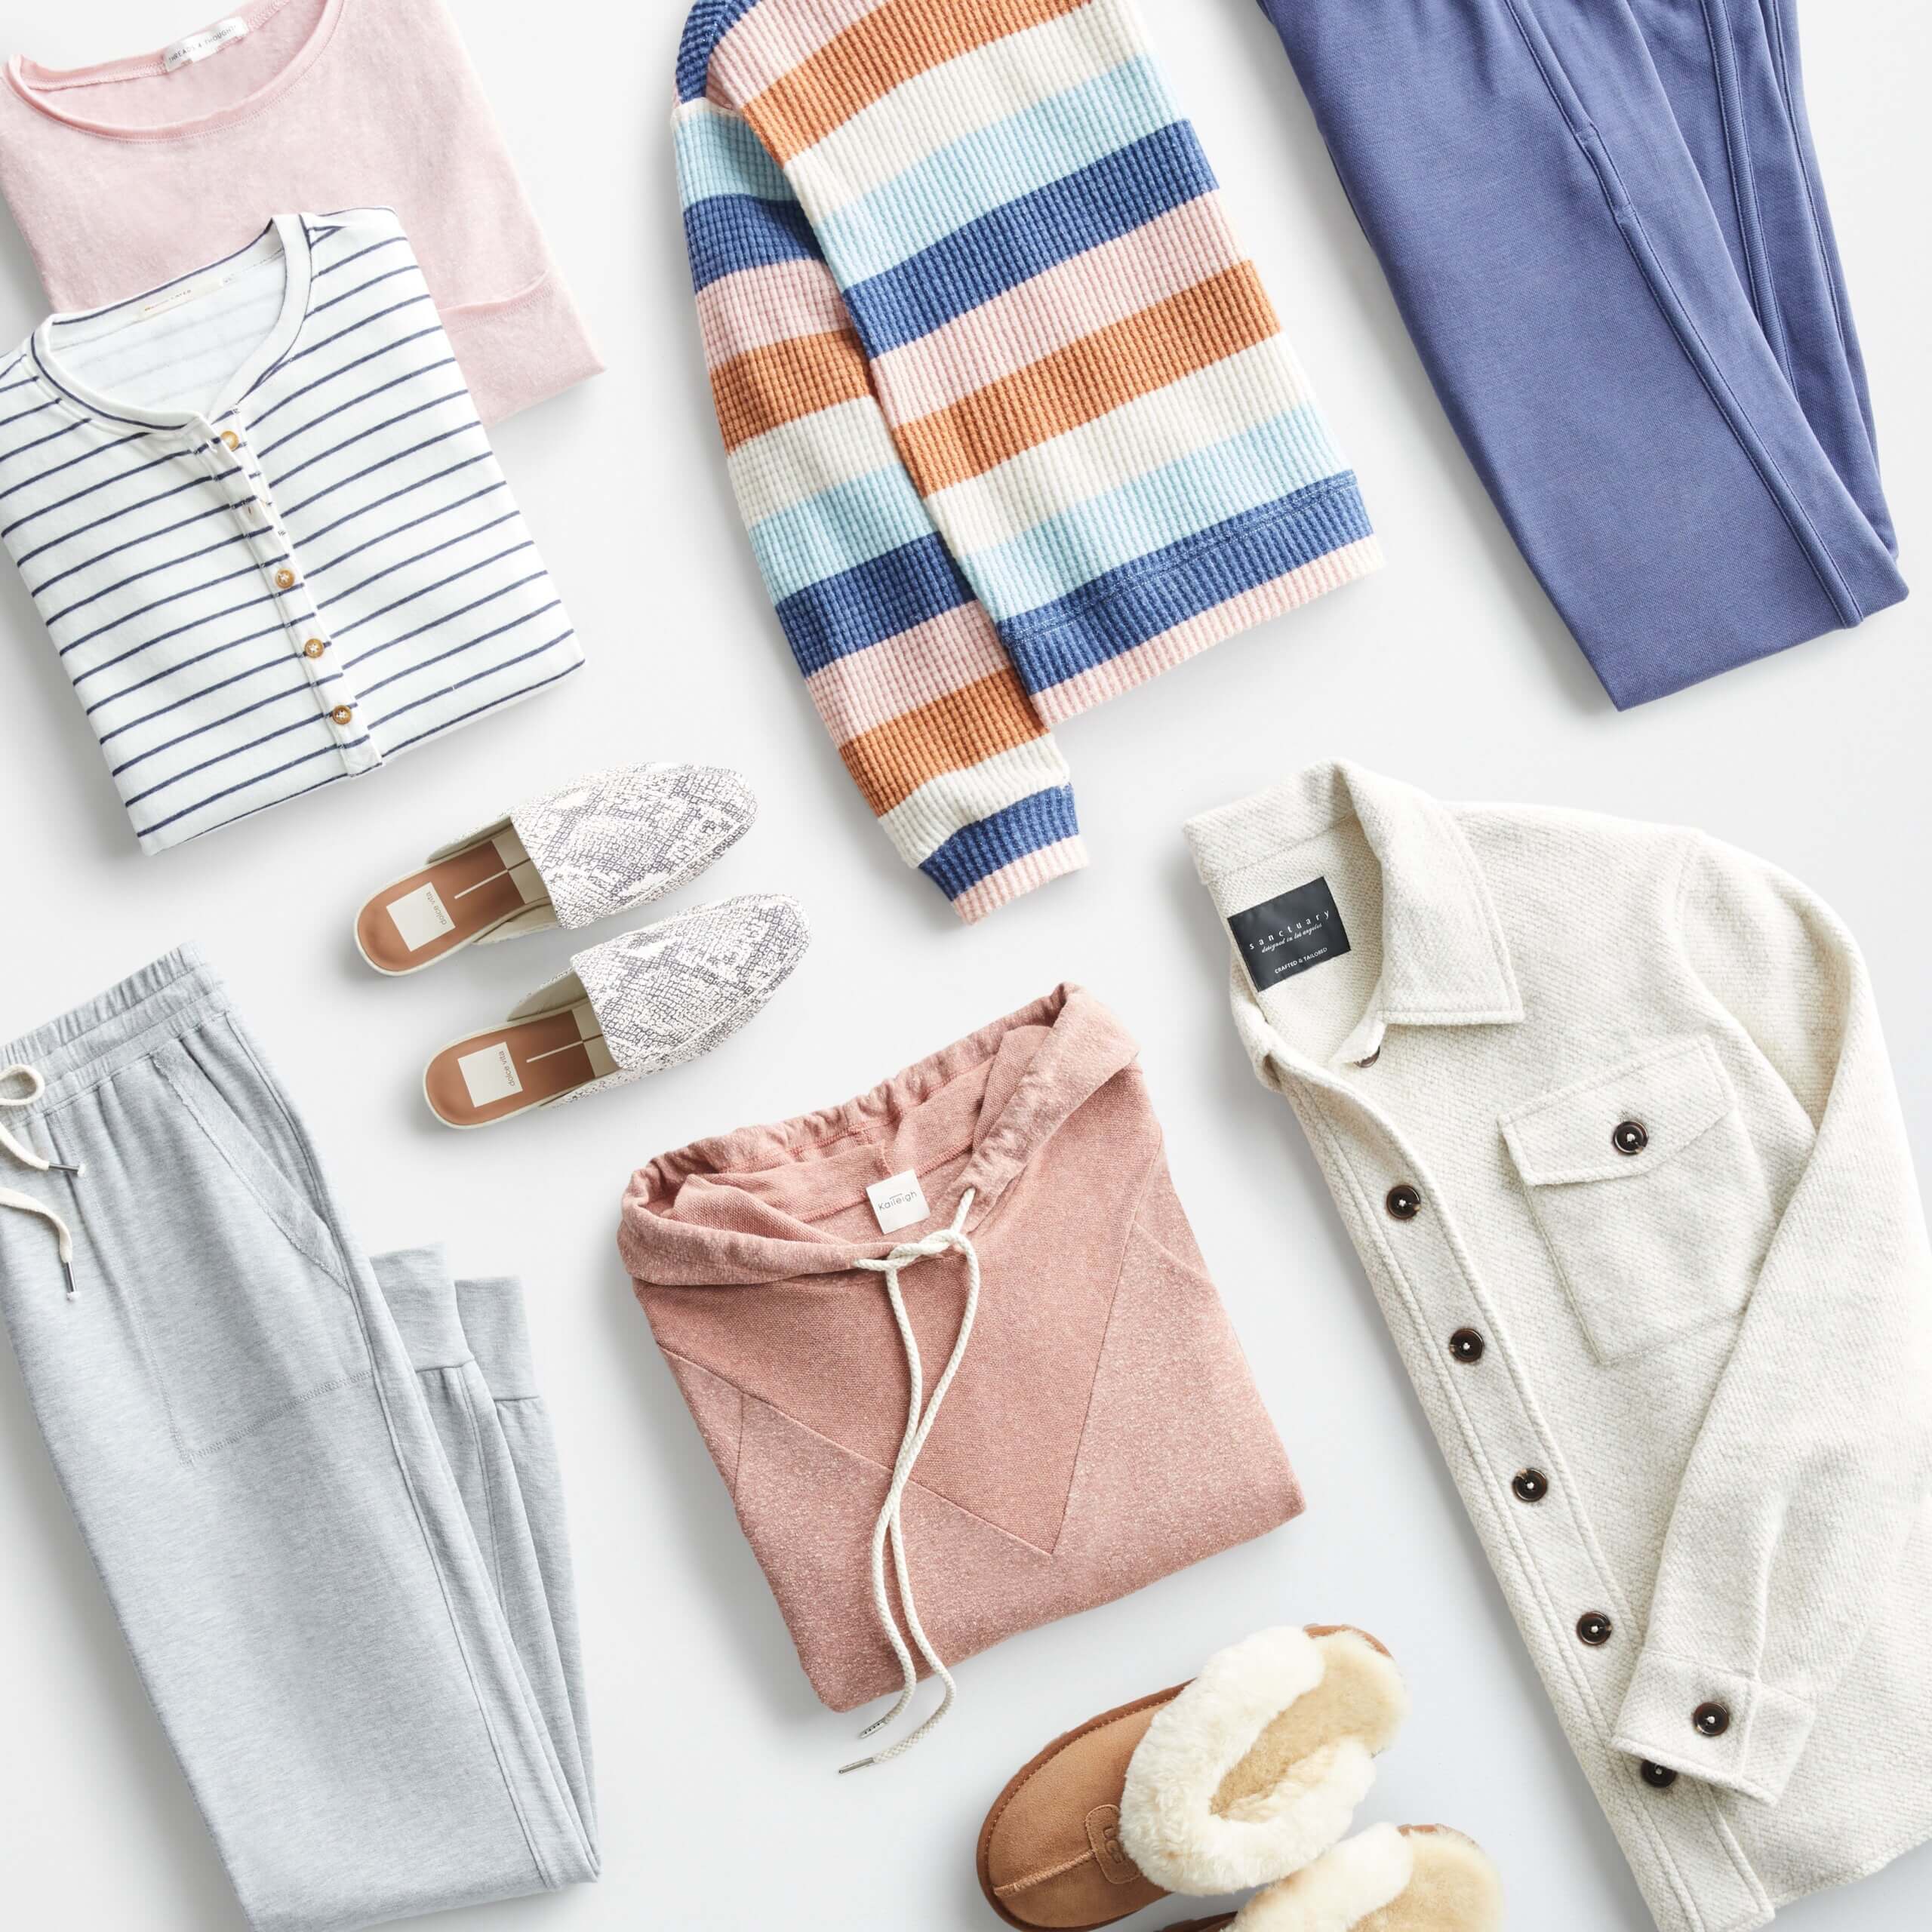 Shop Stitch Fix's New Elevate Collection, Featuring the Work of